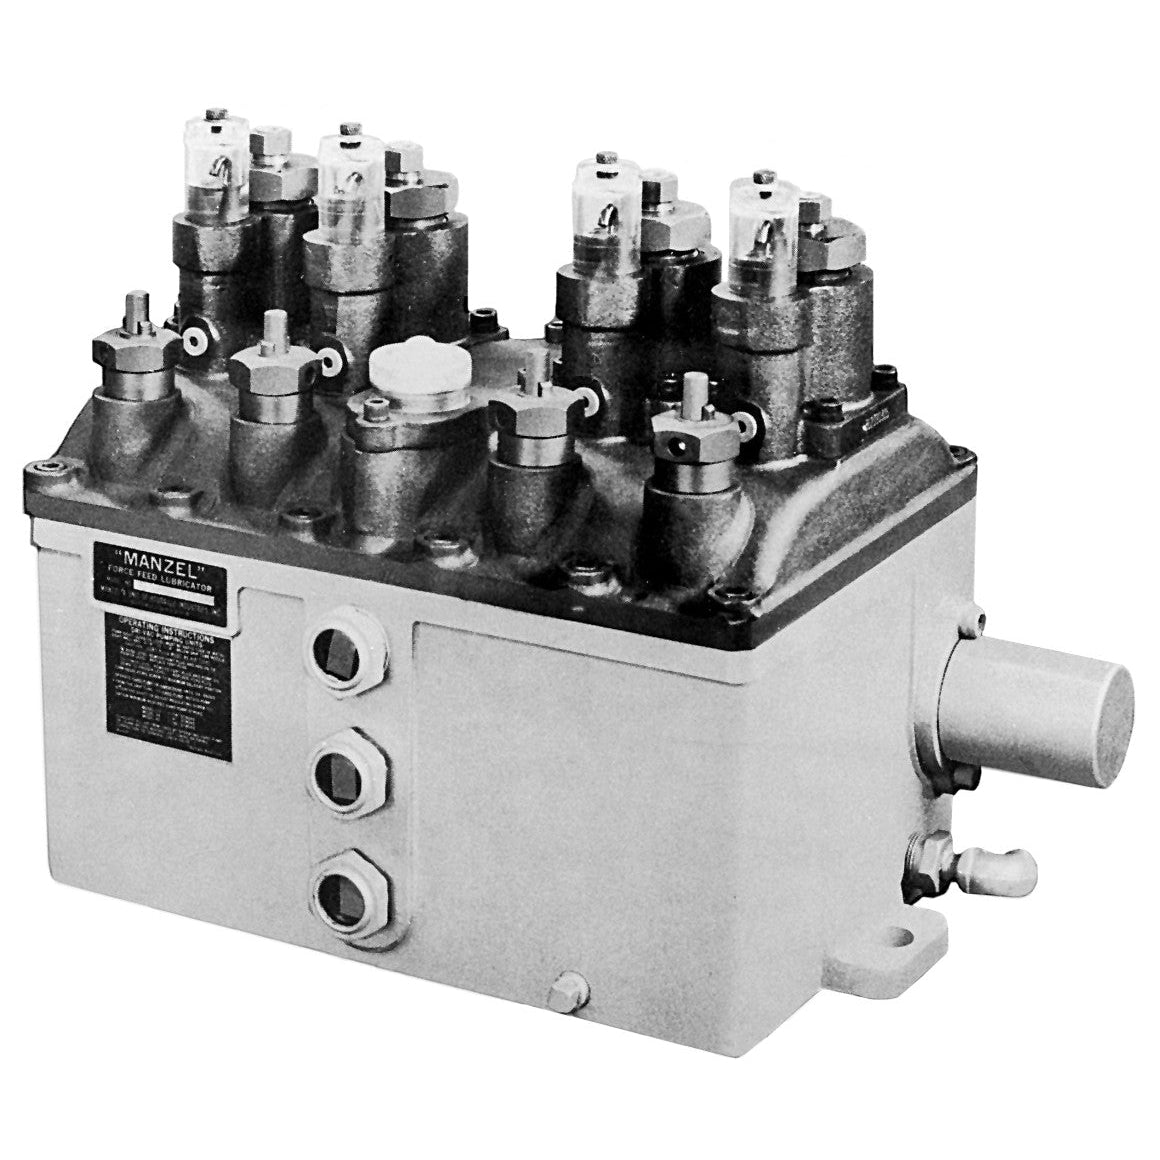 HP-50 Lubricator without Pumps or Options